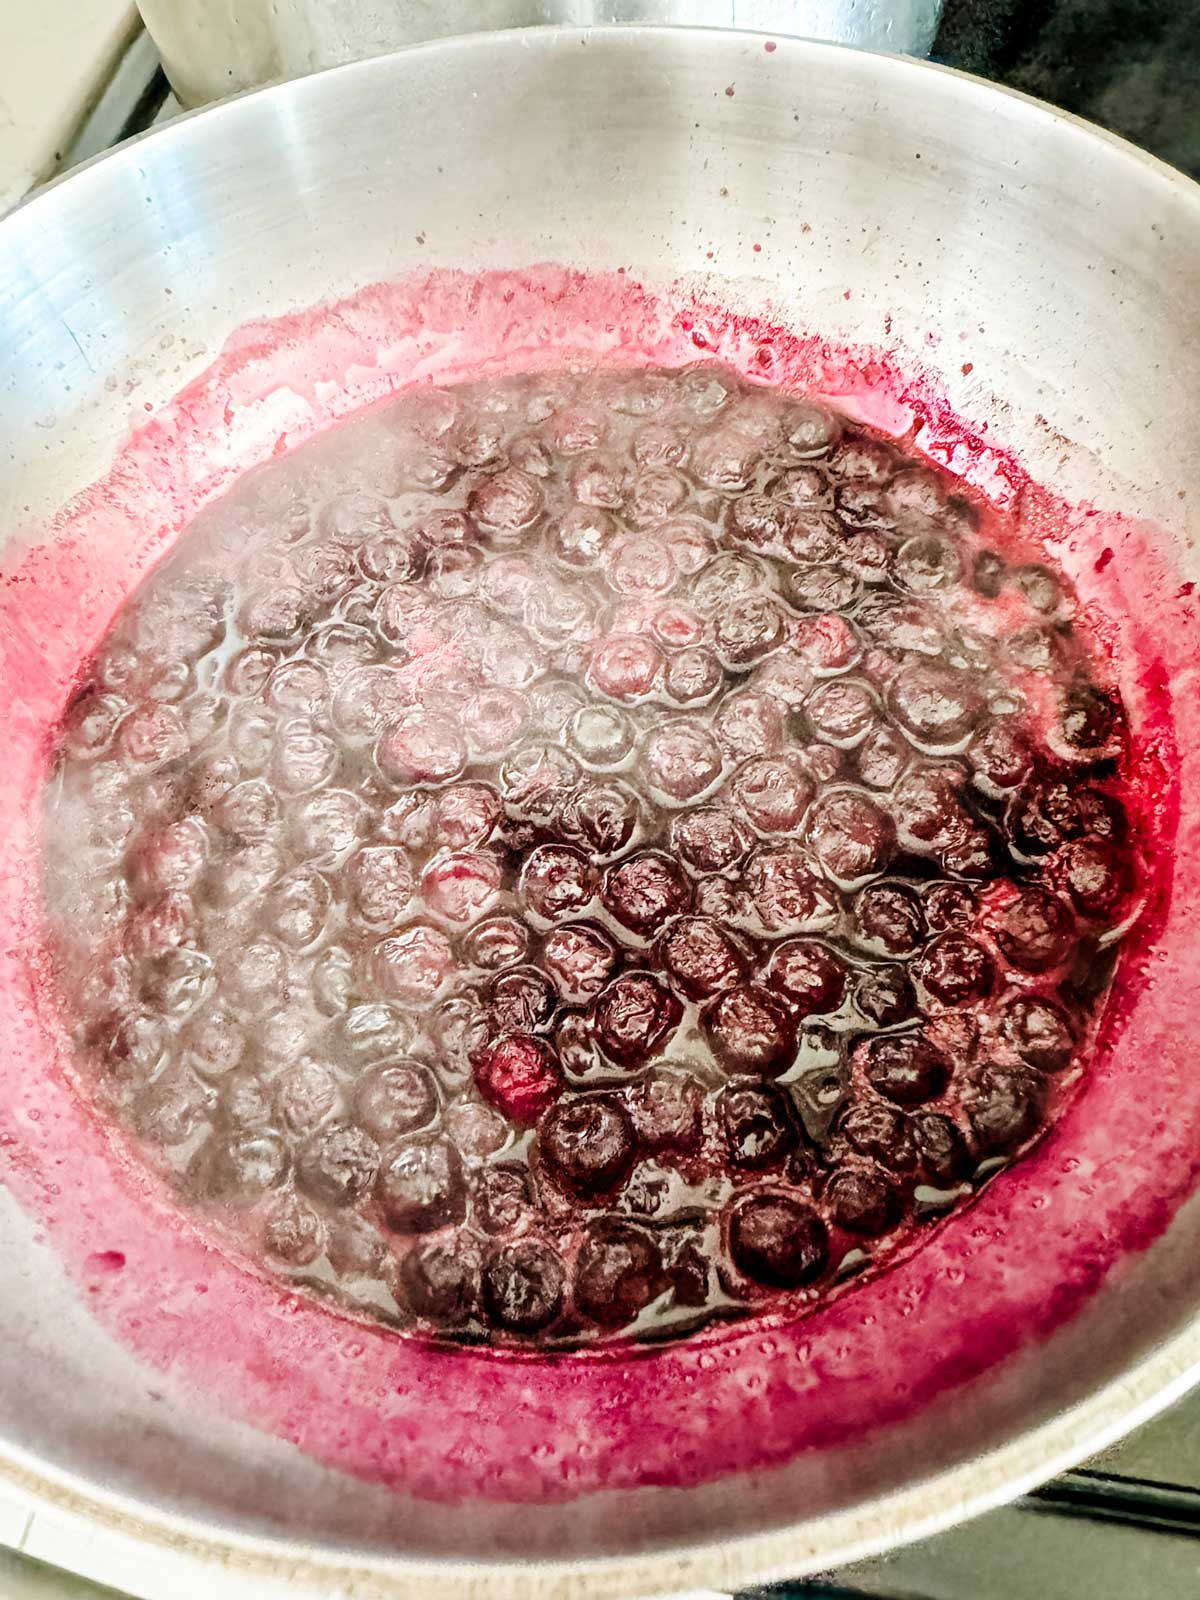 Blueberry compote cooking in a saucepan.